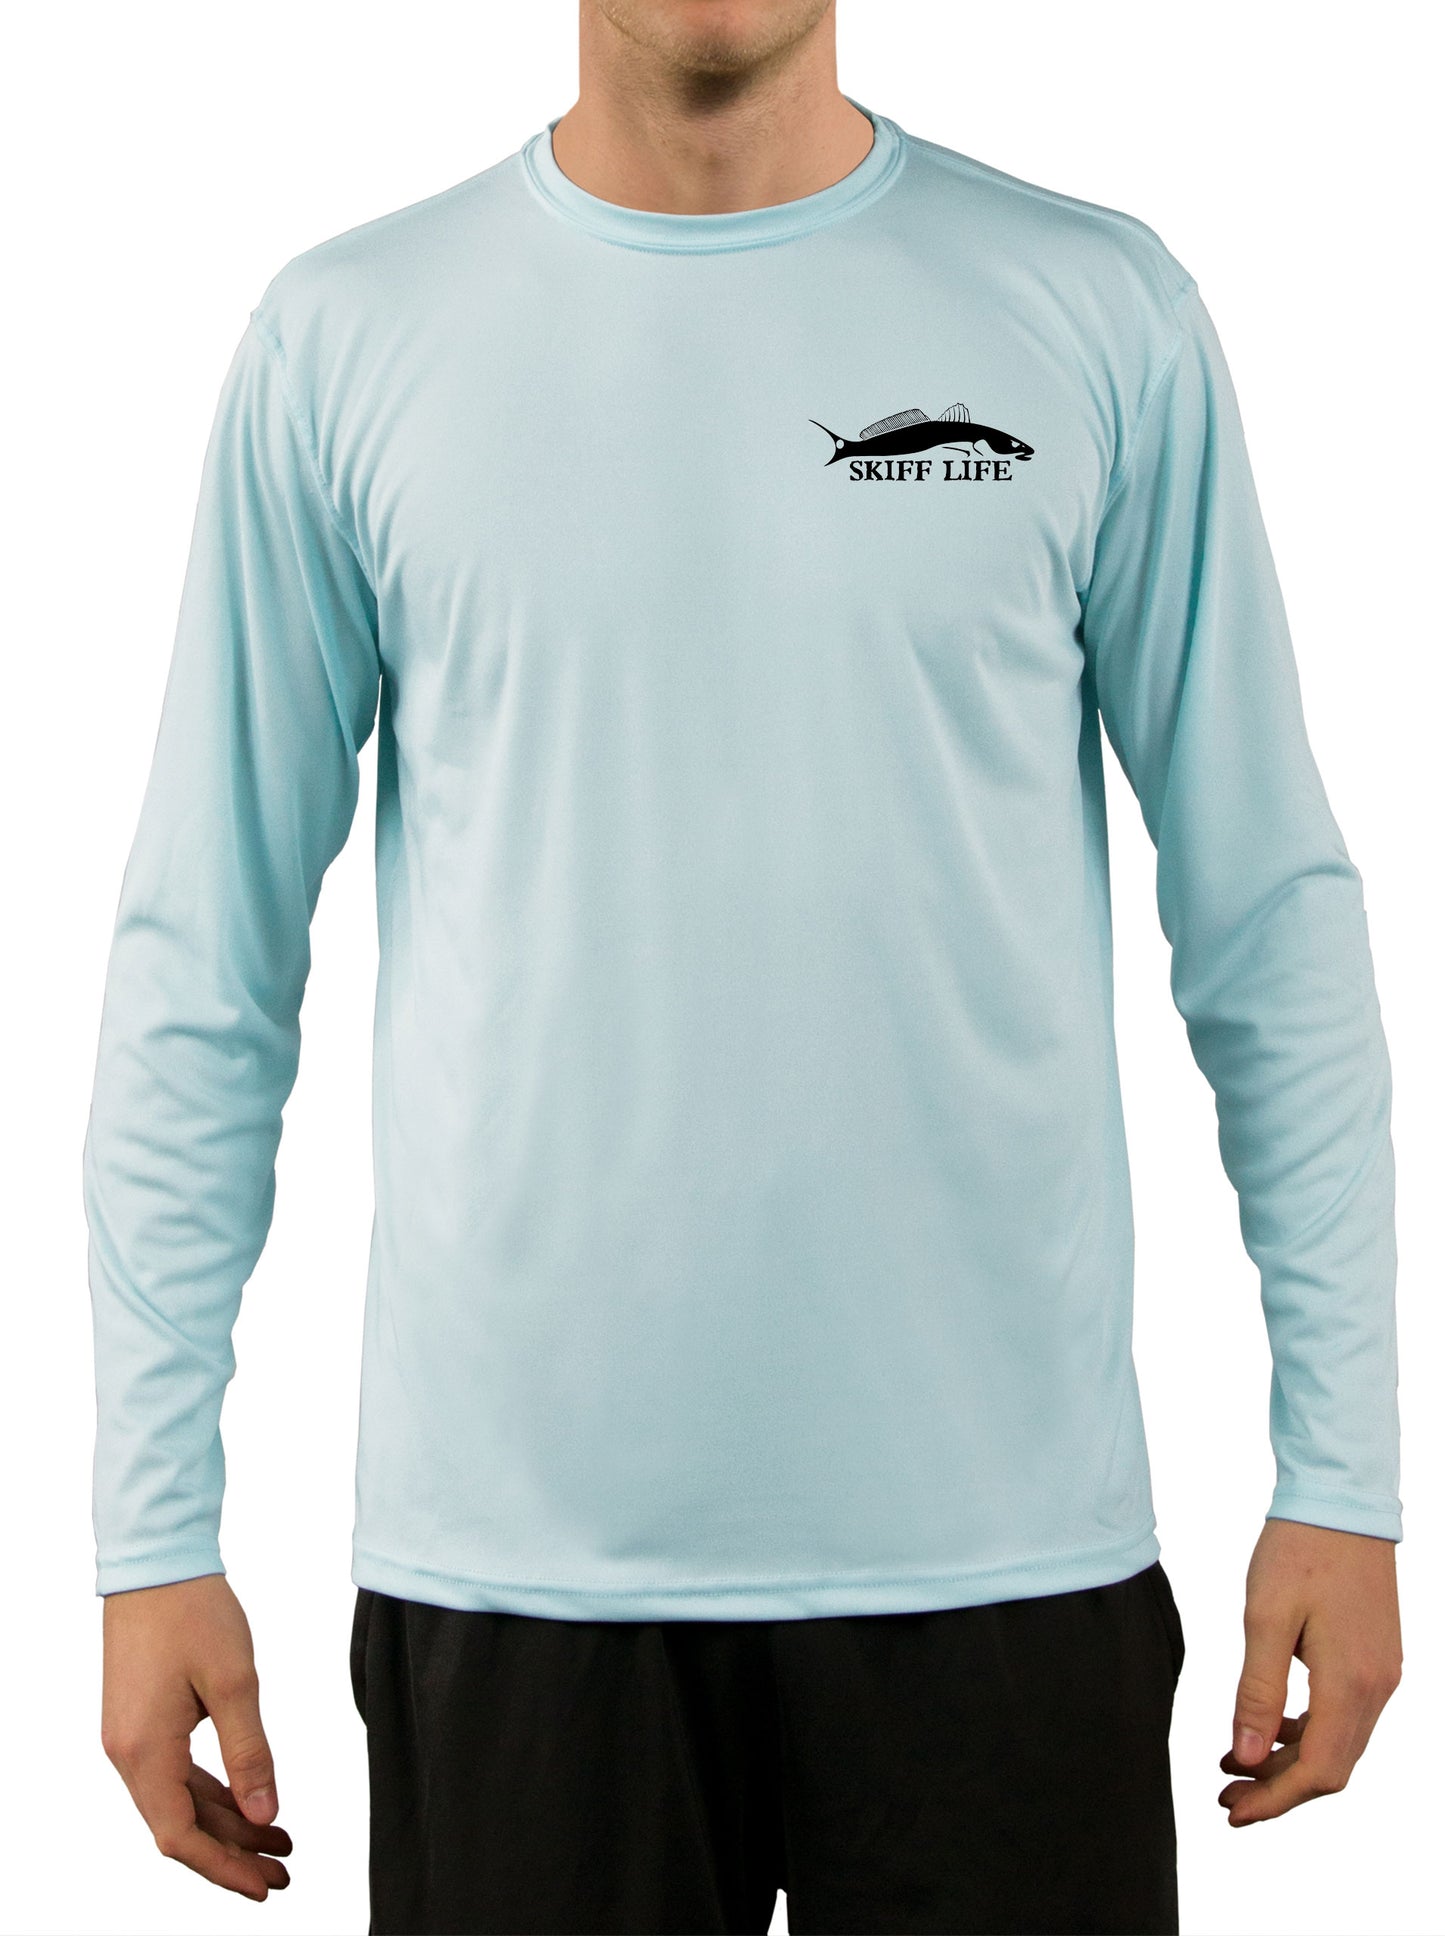 Cape Coral Florida Fishing Shirts For Men Redfish Speckled Sea Trout Snook Red Drum Seatrout - Skiff Life